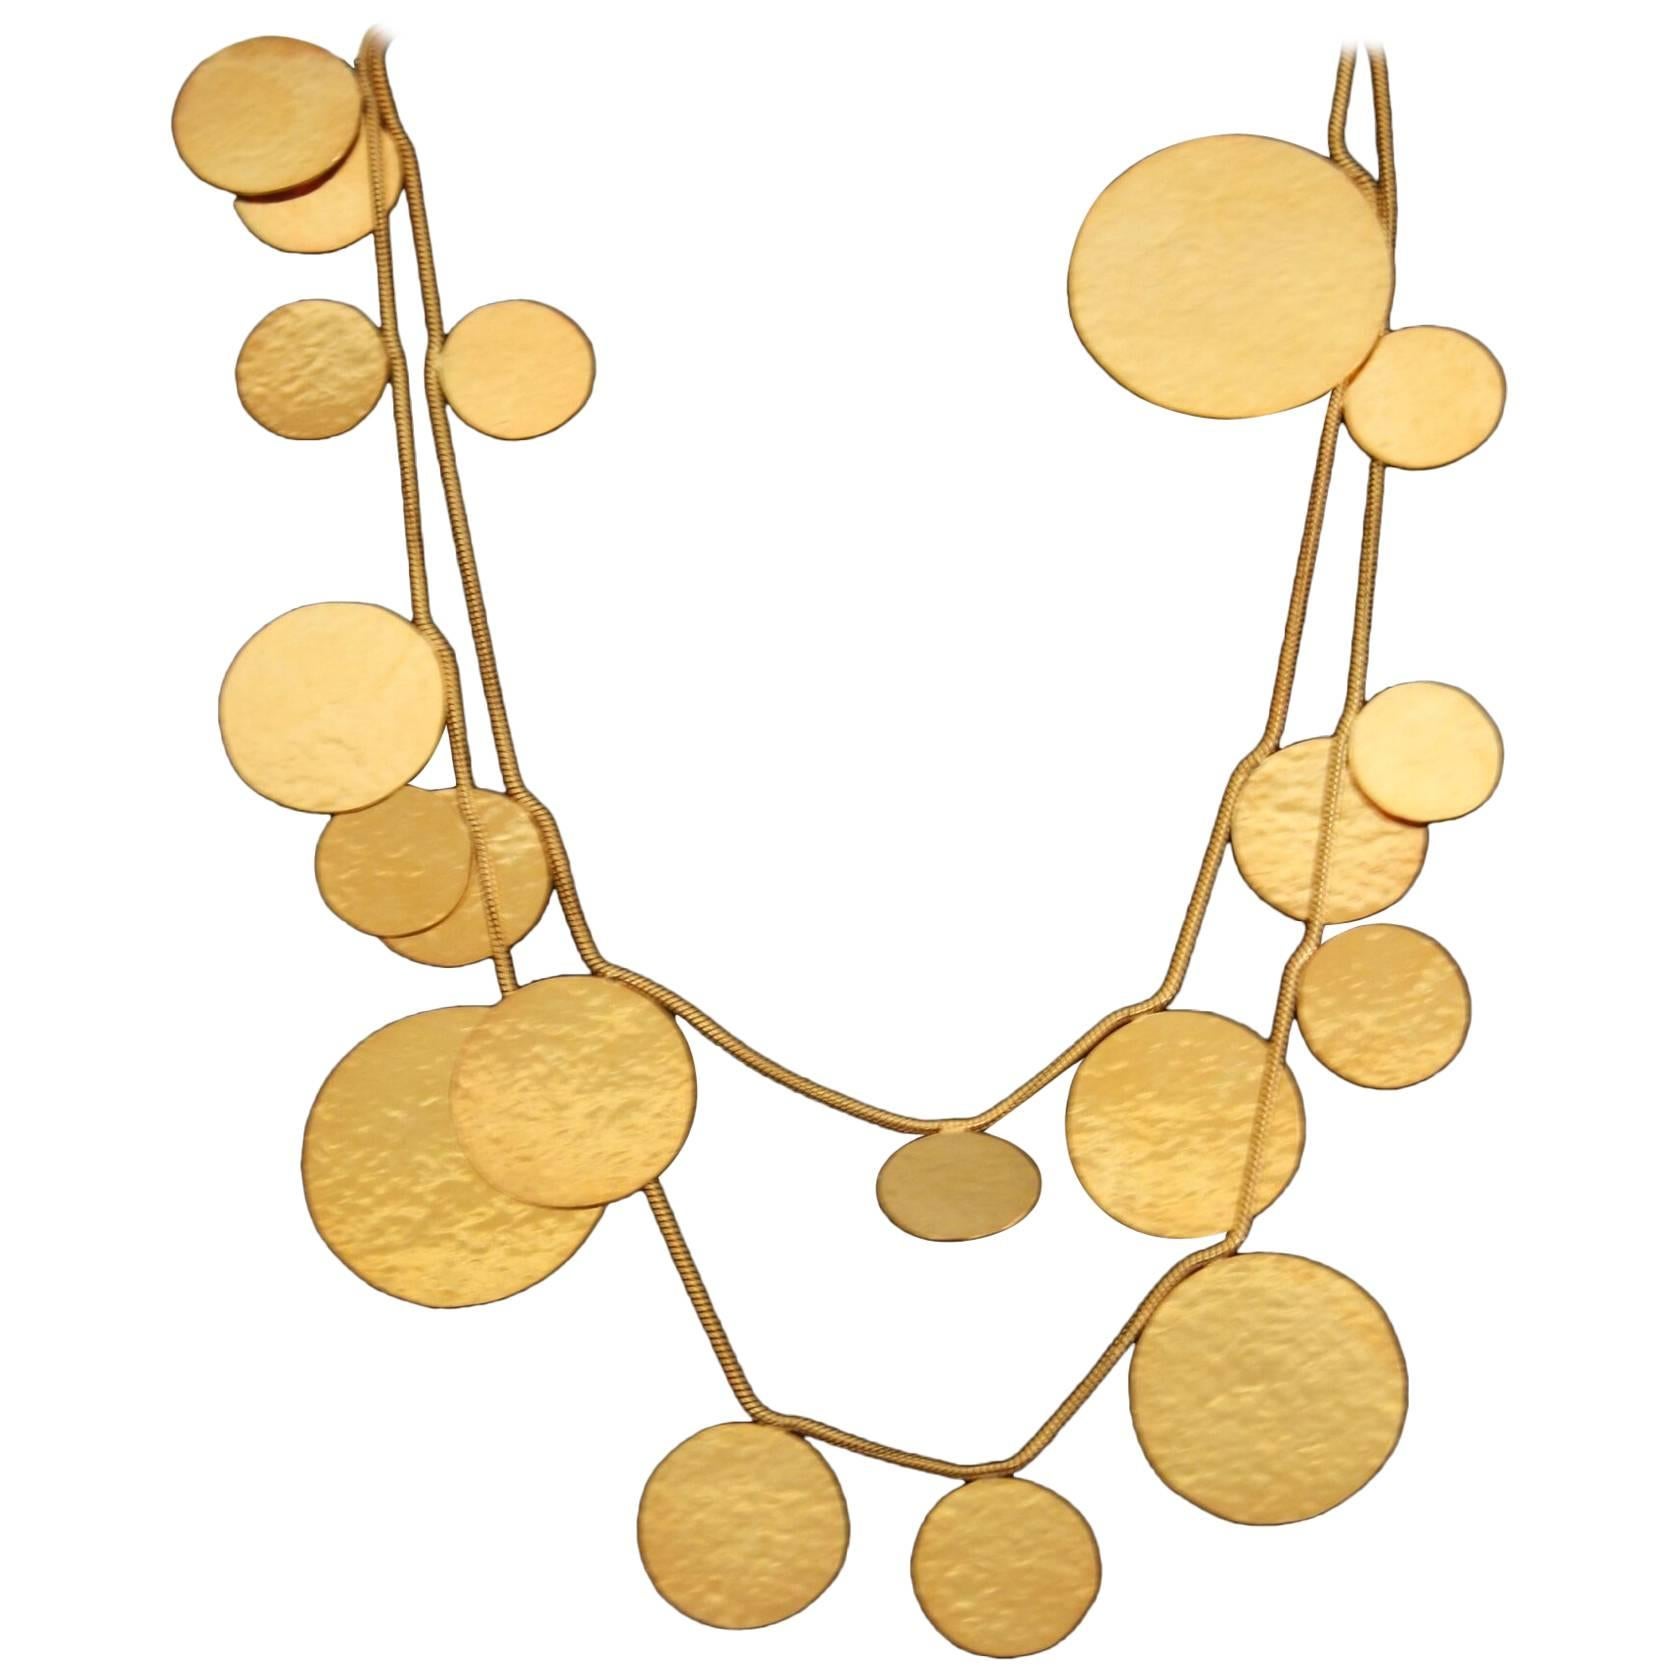 Long hand hammered gold plated brass sautoir necklace from Herve van der Straeten. Can be doubled or worn long - extremely lightweight. 

This designer is no longer producing jewelry, making all remaining pieces collector's items. As such, prices